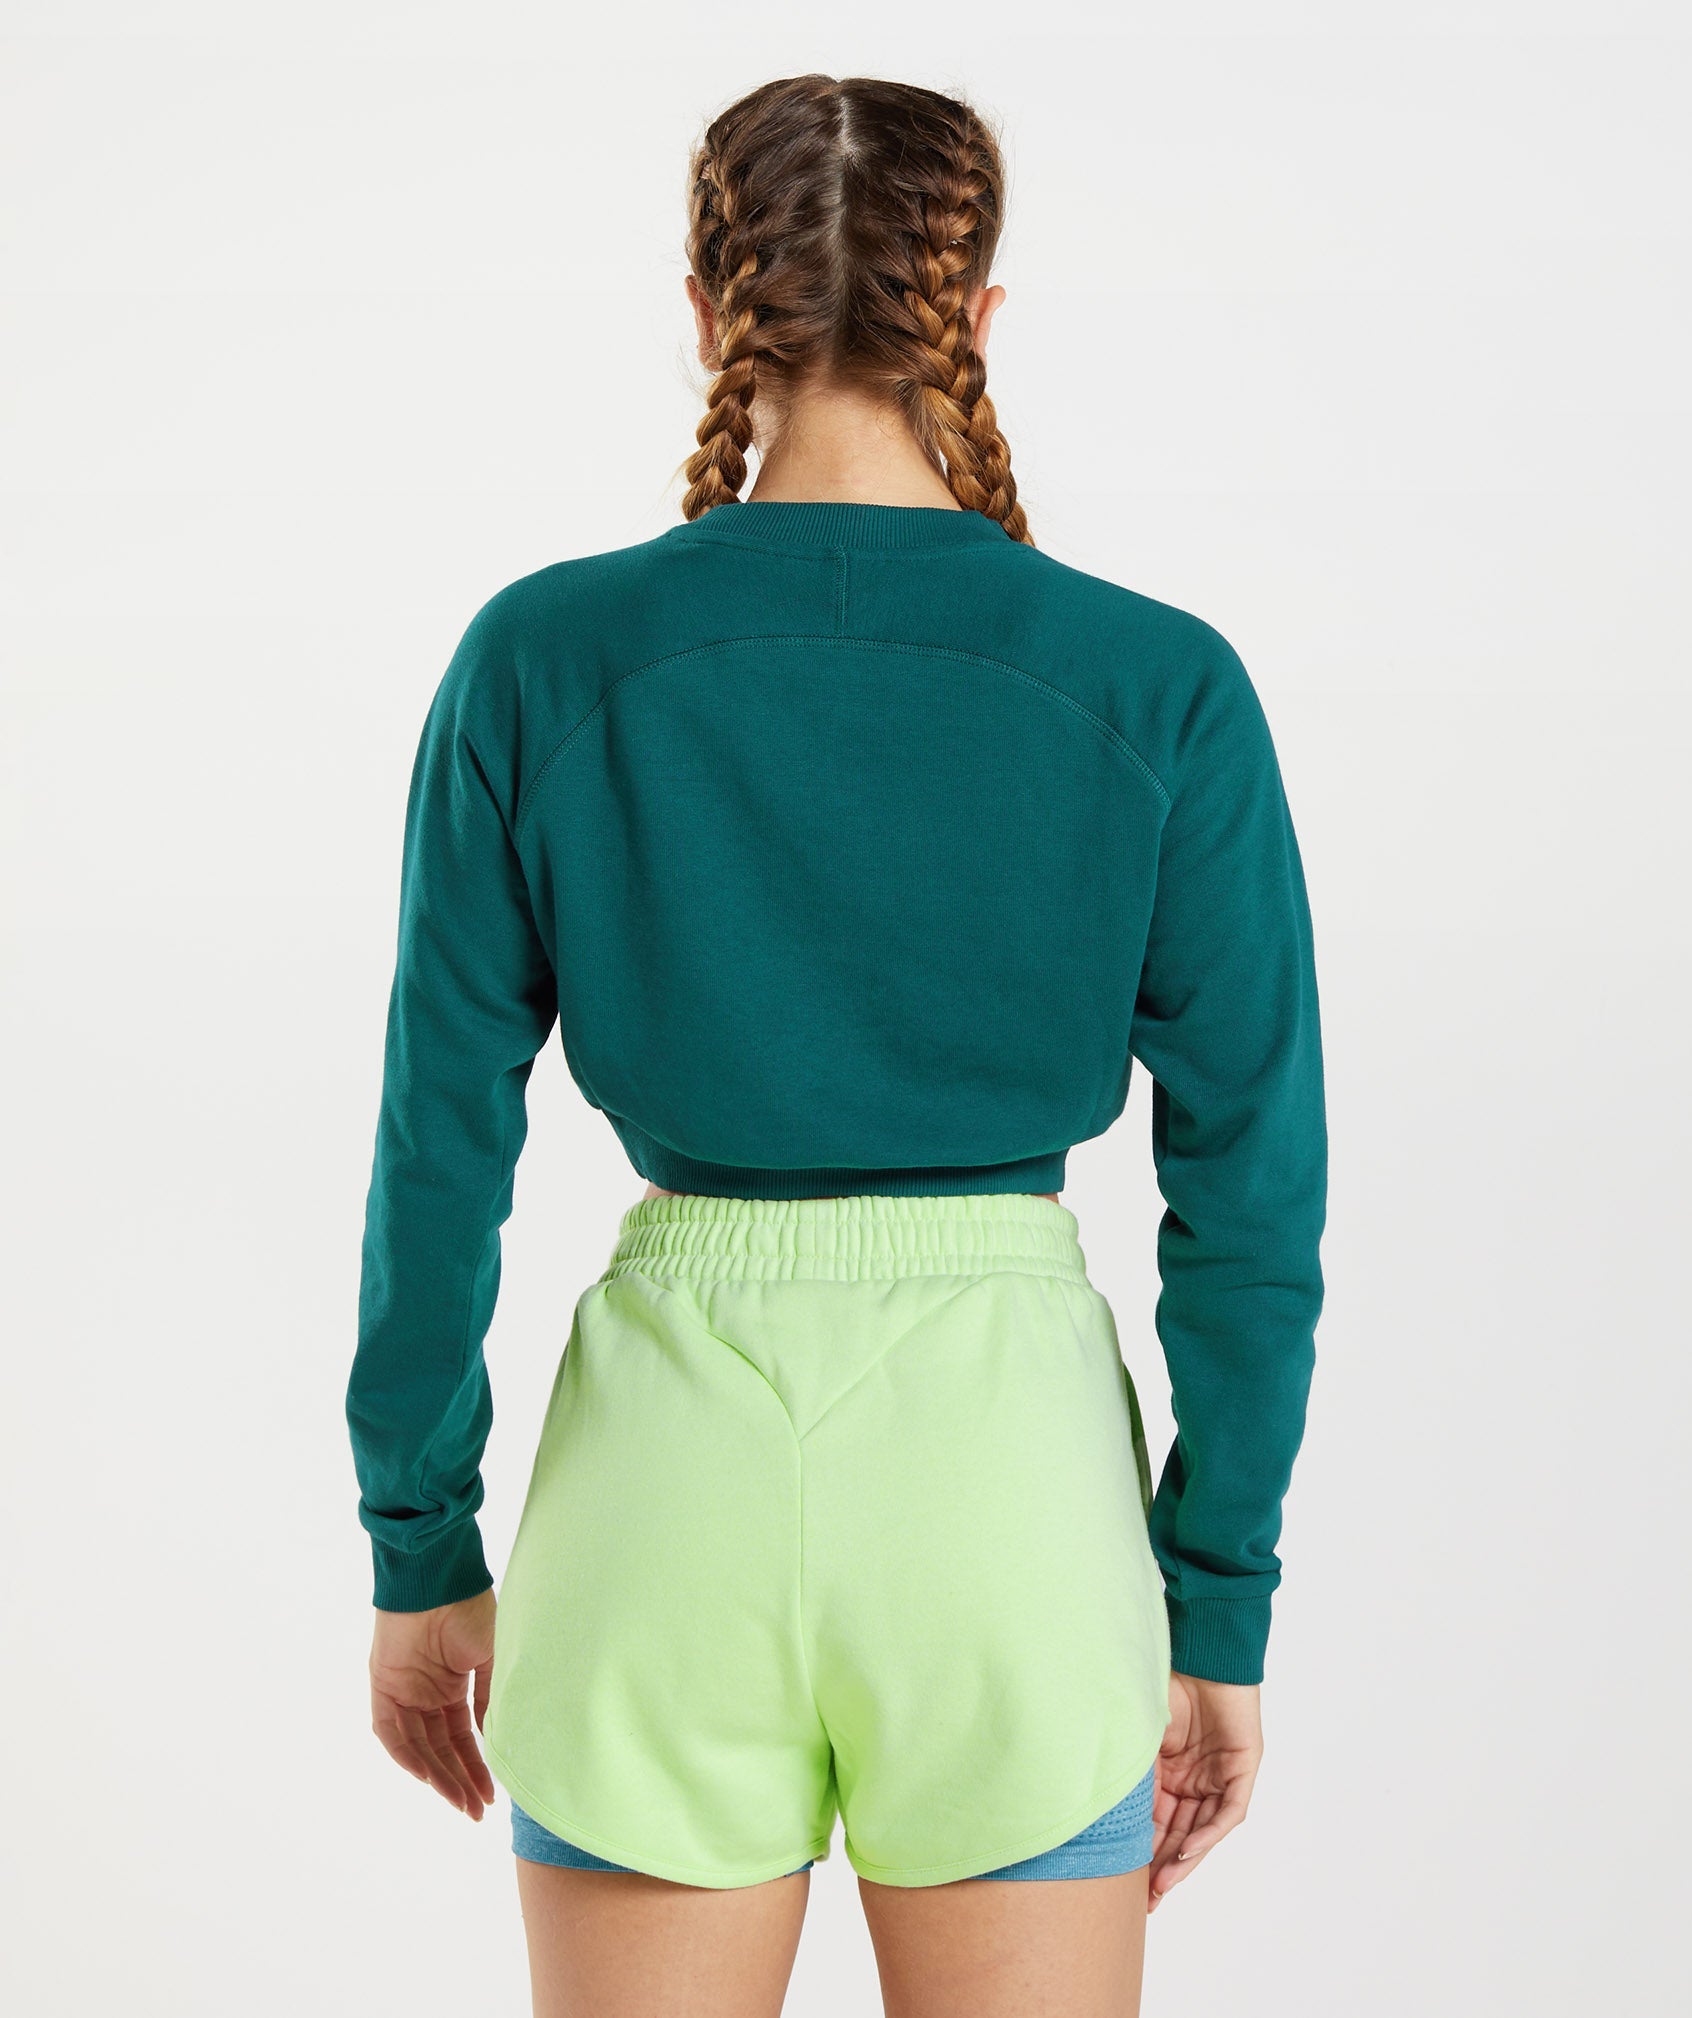 Training Cropped Sweater in Winter Teal - view 2